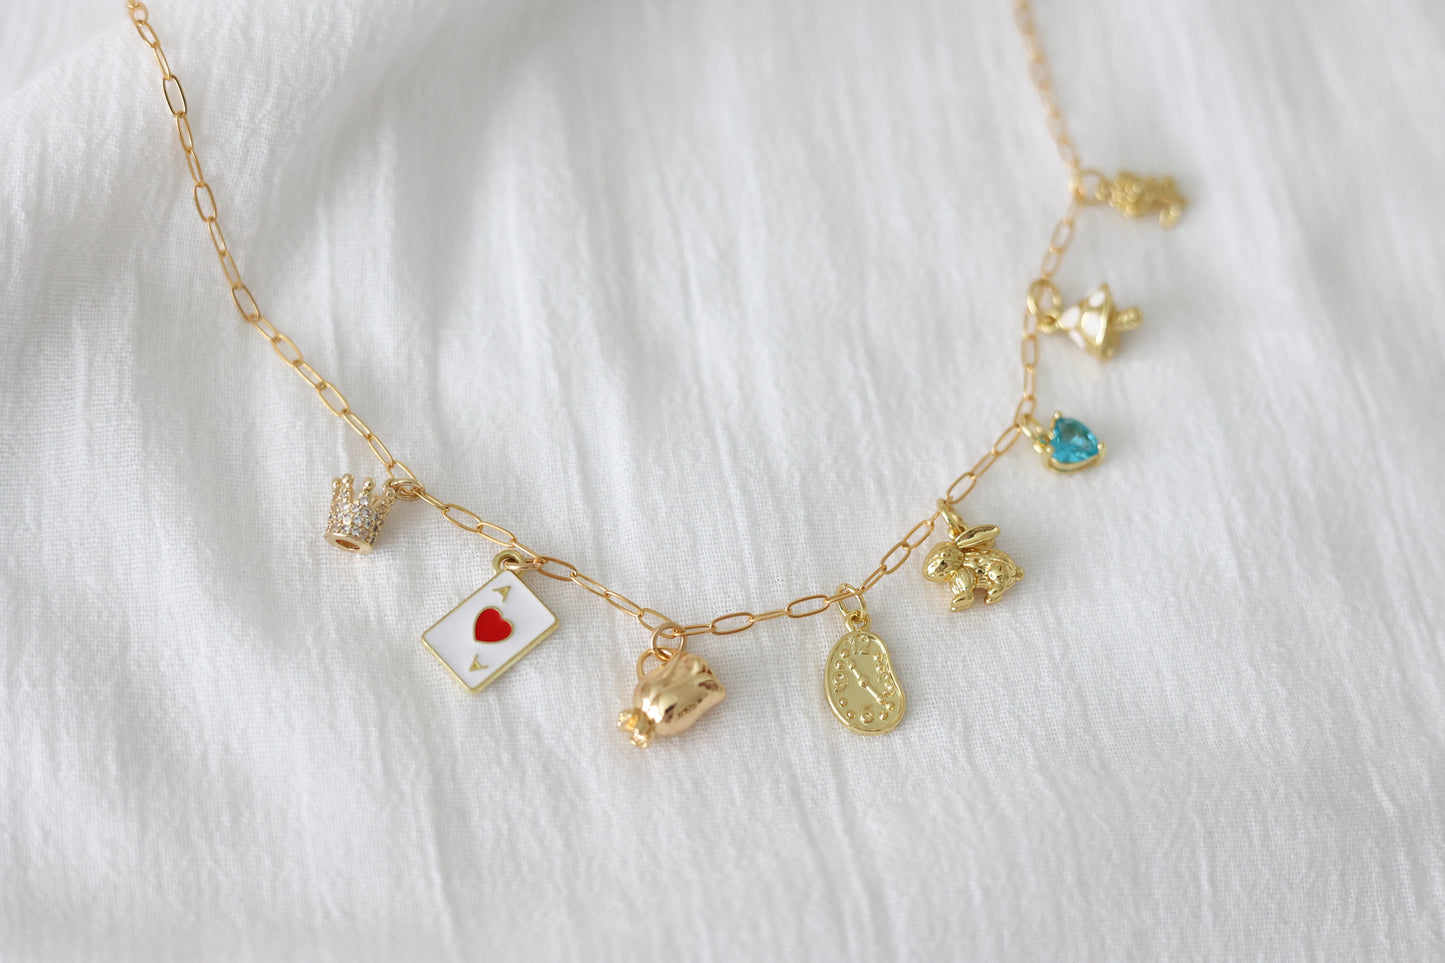 Pixie Dust Collection - Alice Inspired Charm Necklace